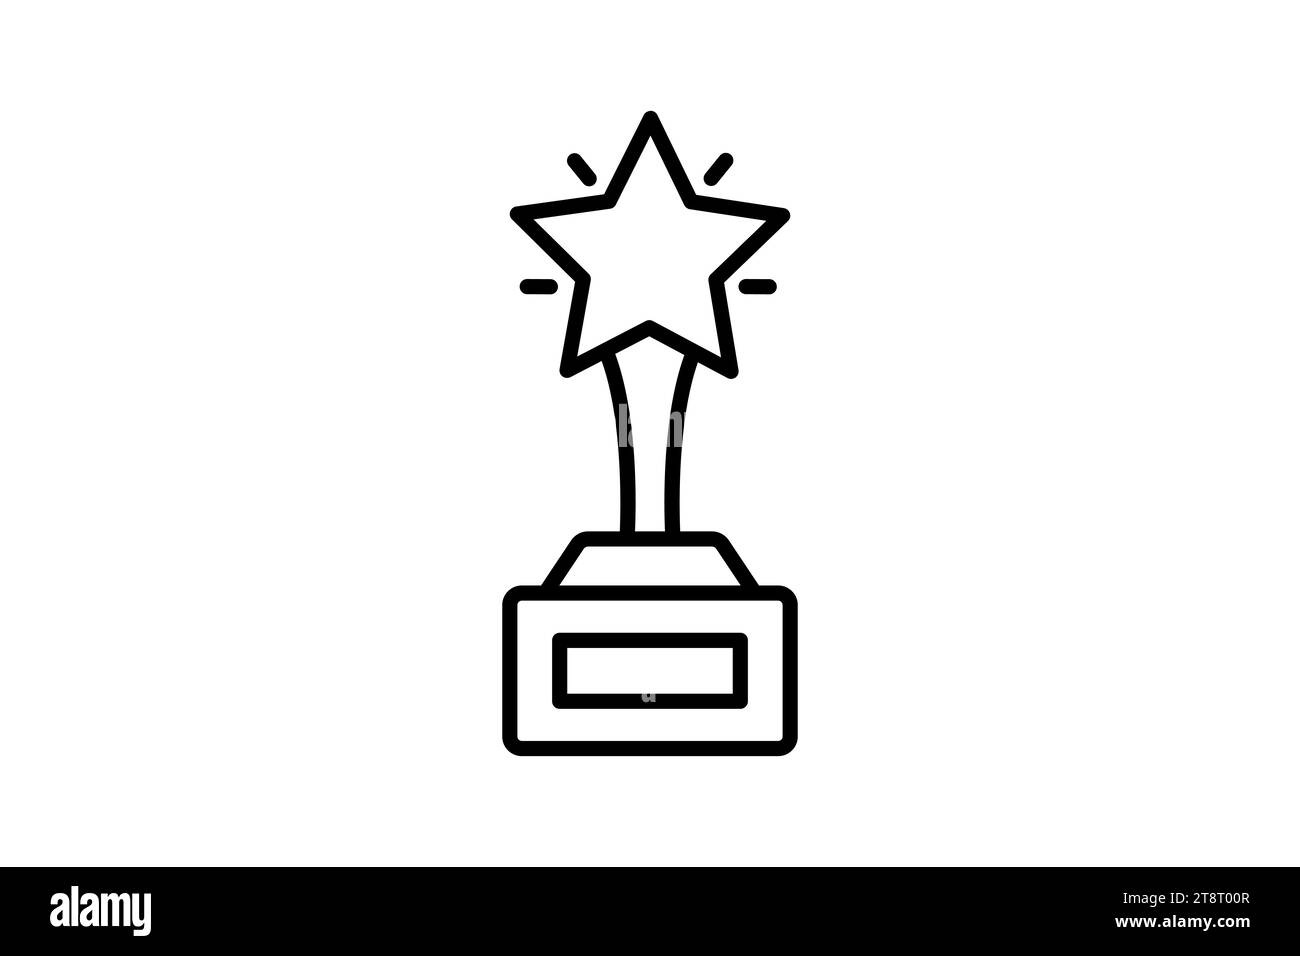 excellence icon. trophy with stars. icon related to core values. line icon style. simple vector design editable Stock Vector